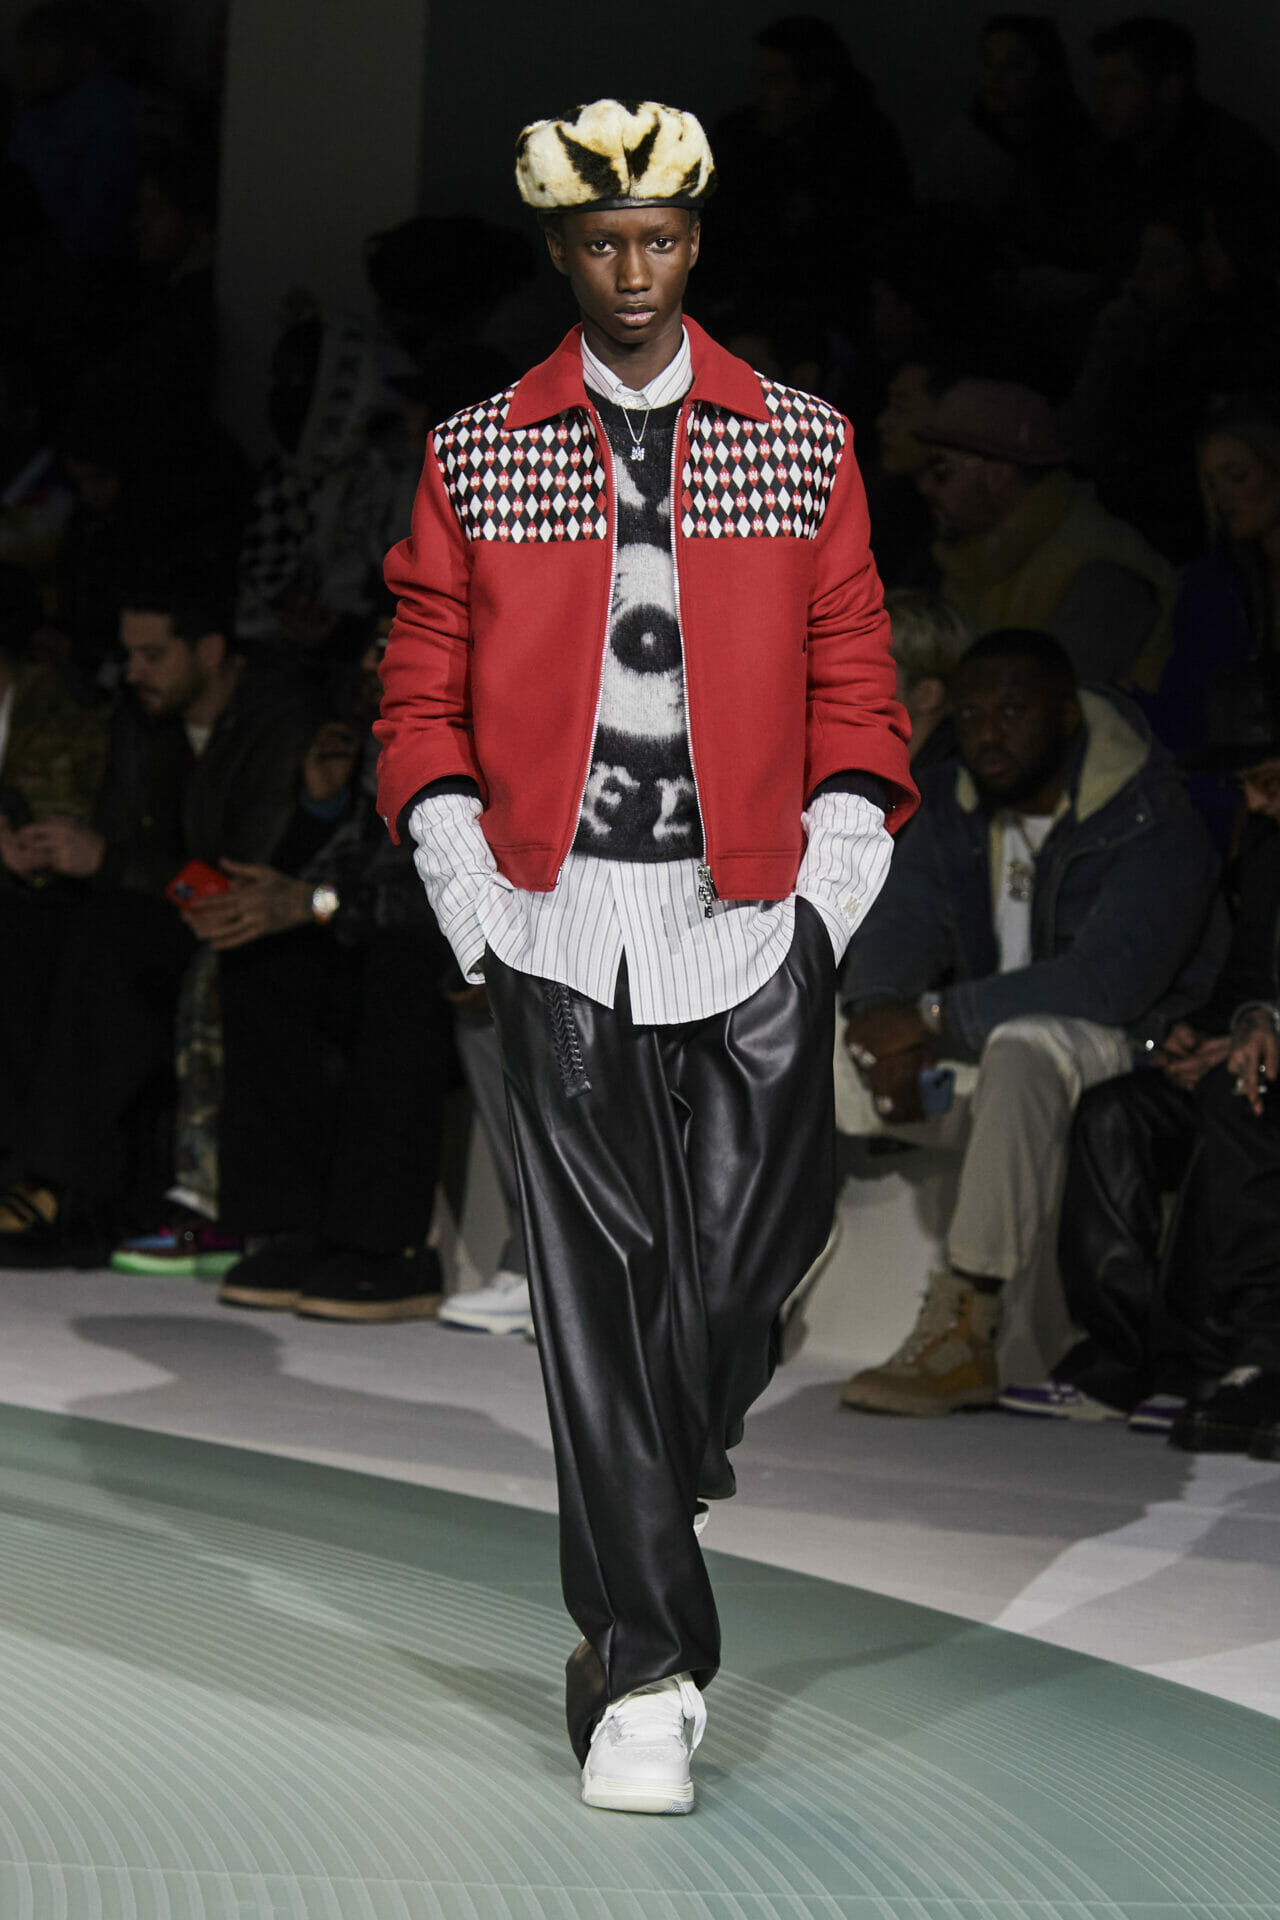 A New Creative Community Arises With the Louis Vuitton FW23 Menswear Show